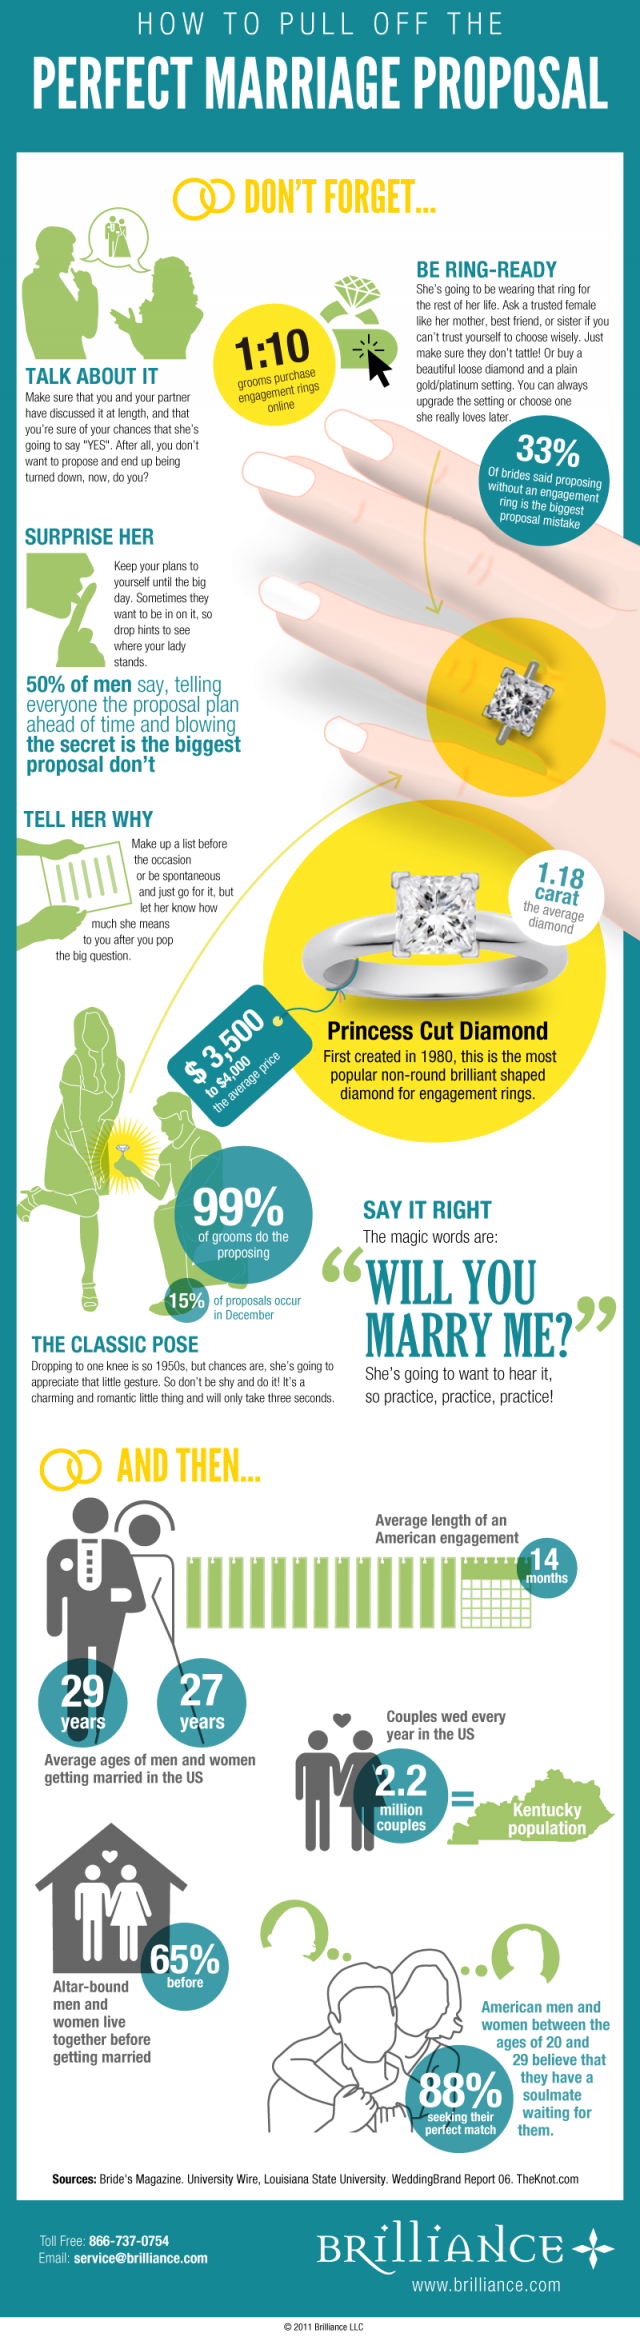 How to pull off the perfect marriage proposal